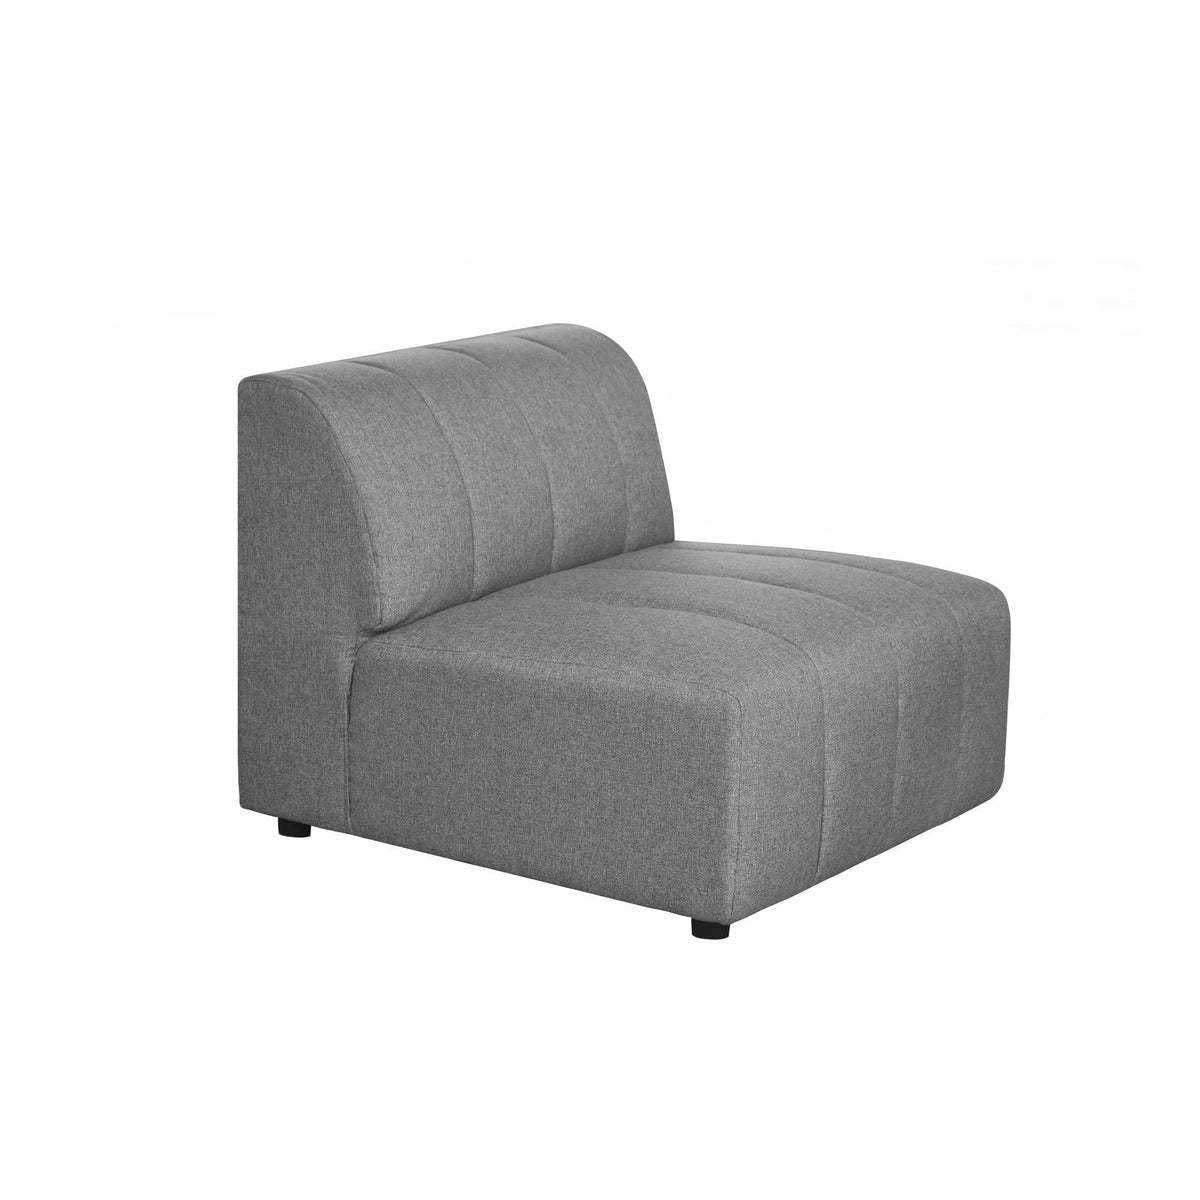 Moe's Home Collection Lyric Slipper Chair Grey - MT-1024-15